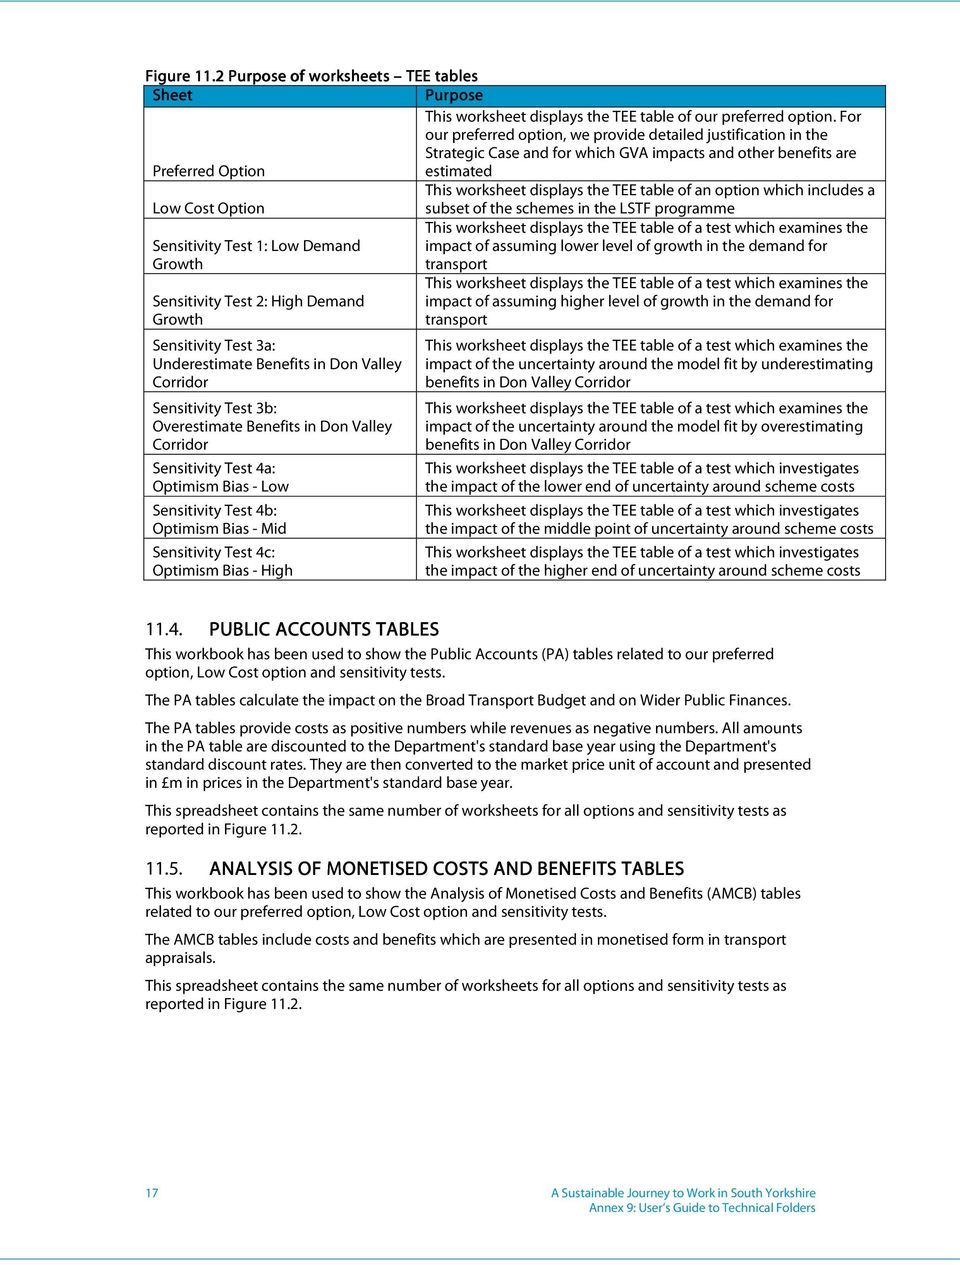 an option which includes a Low Cost Option subset of the schemes in the LSTF programme This worksheet displays the TEE table of a test which examines the Sensitivity Test 1: Low Demand impact of